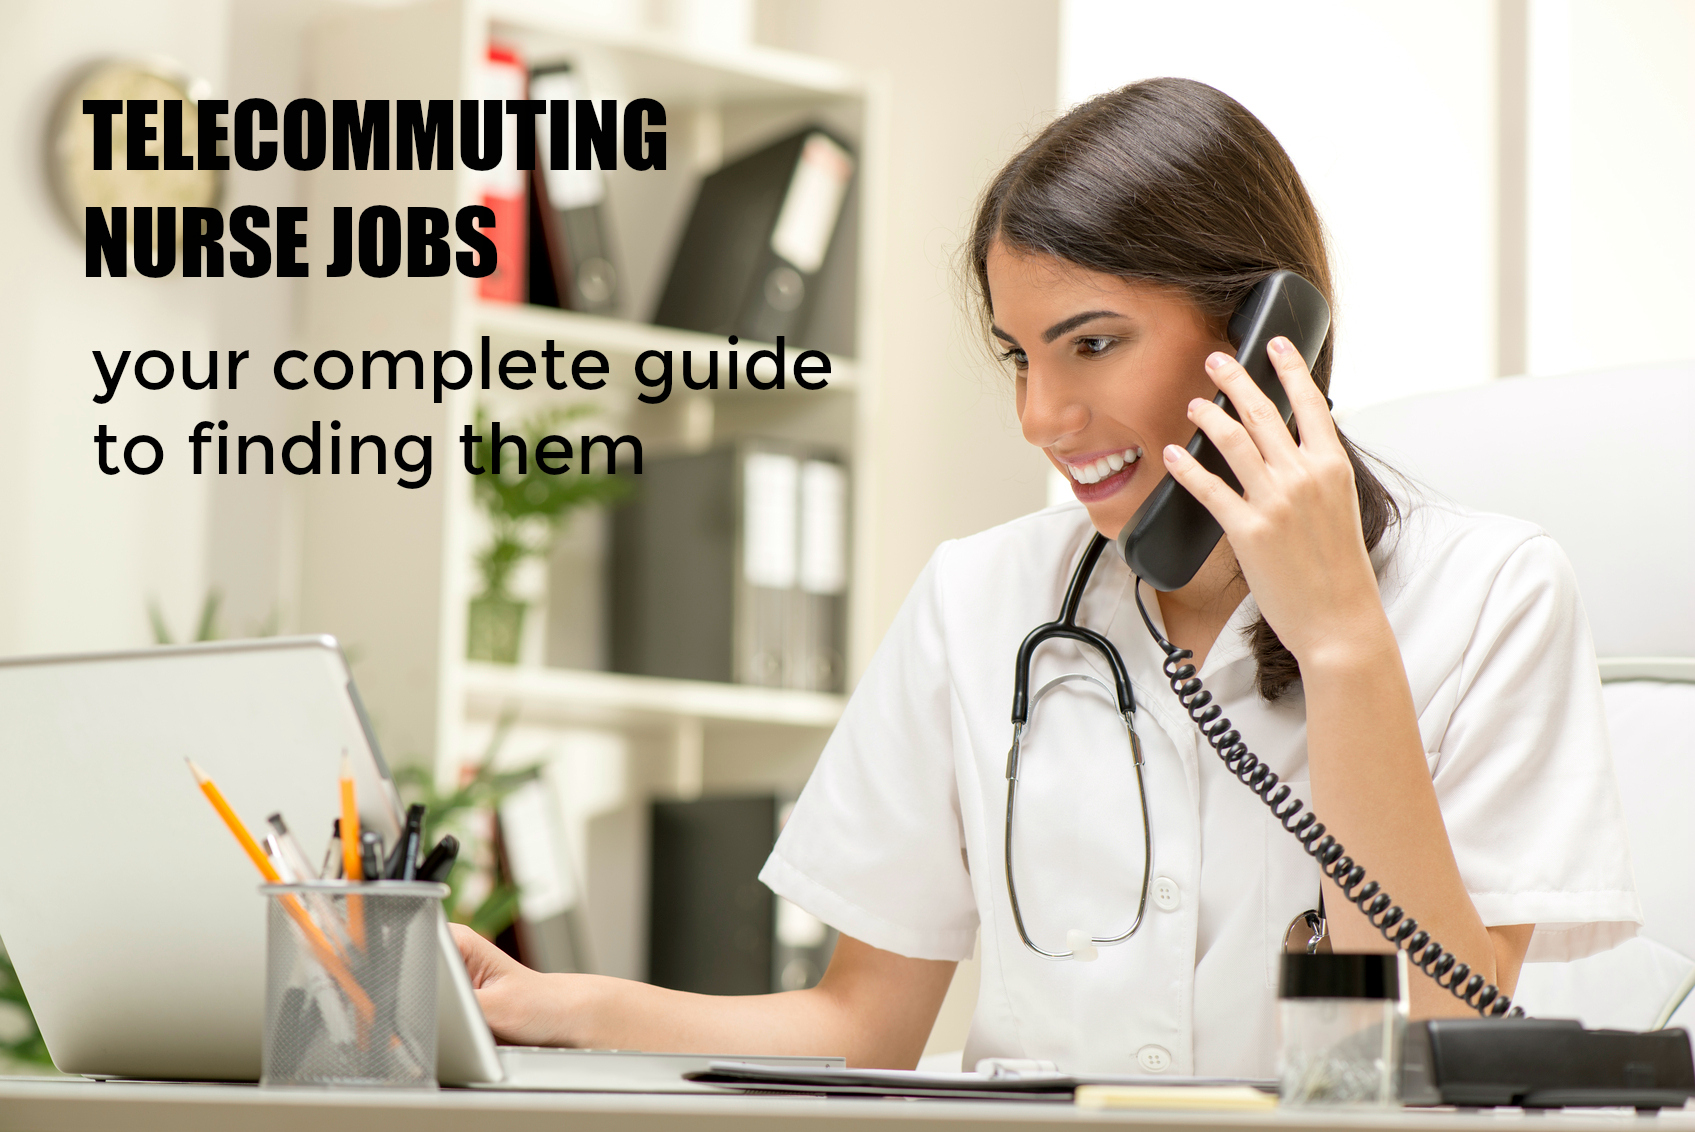 what's nurse orthopedic Jobs: Finding Nurse Guide to Telecommuting Them